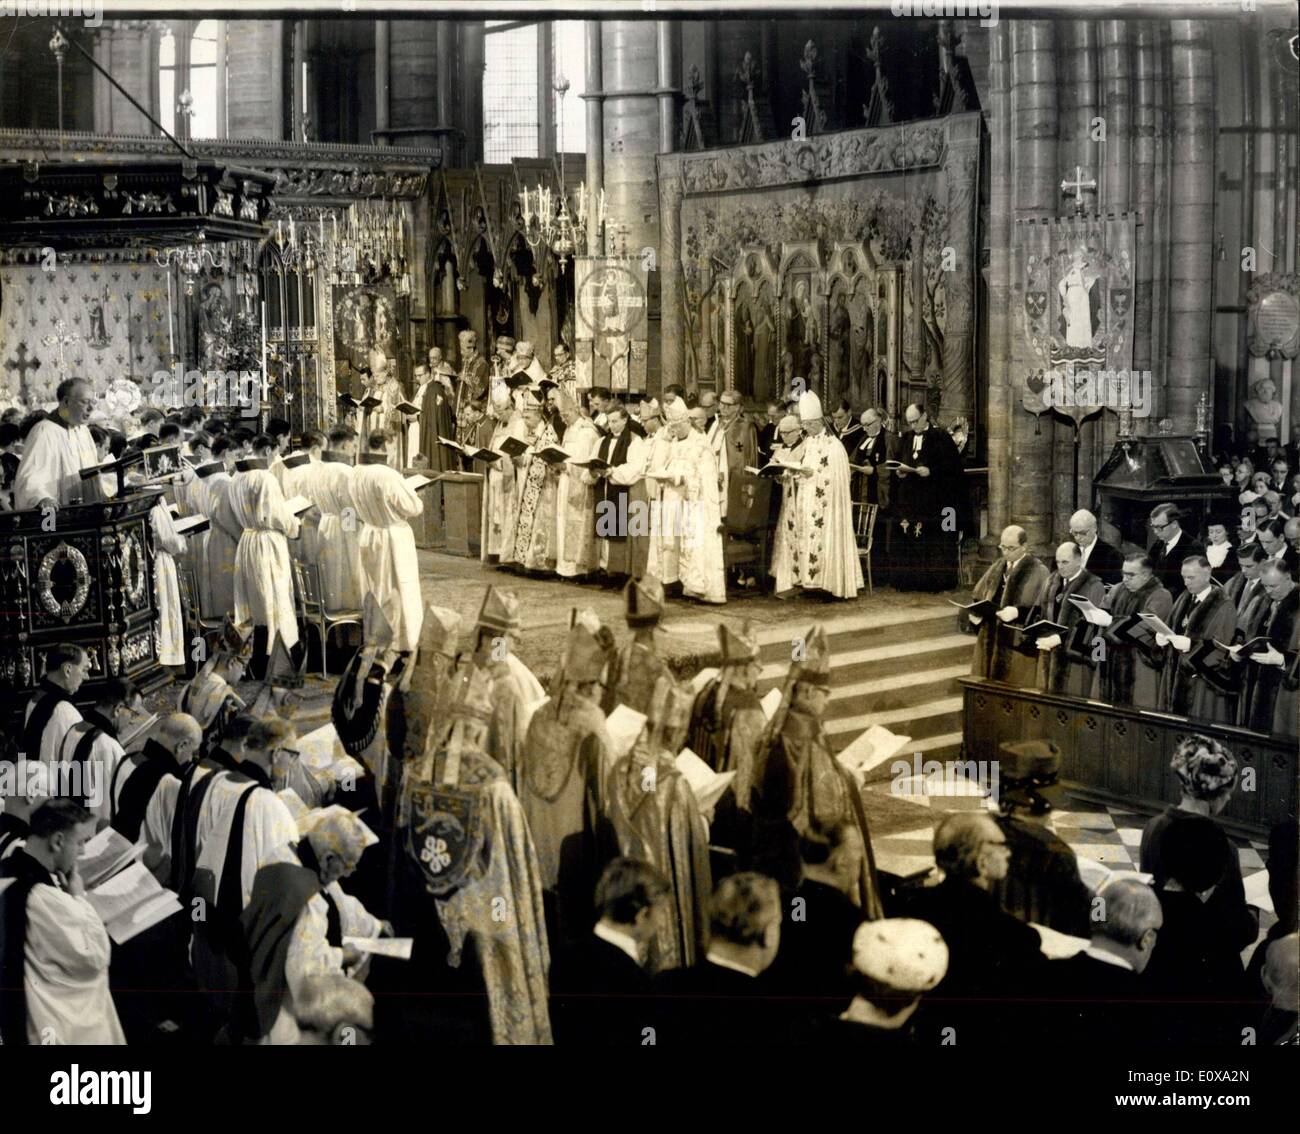 Dec. 28, 1965 - Queen attends Westminster Abby inaugeral service: H.M. The Queen today attended the inaugeral service at Westminster Abbey for the celebrations commemmorating the 900th. Anniversary of the Abbey's consecration. Other members of the Royal Family also attended. Photo shows the scene inside Westminster Abbey this morning, during the service. Stock Photo